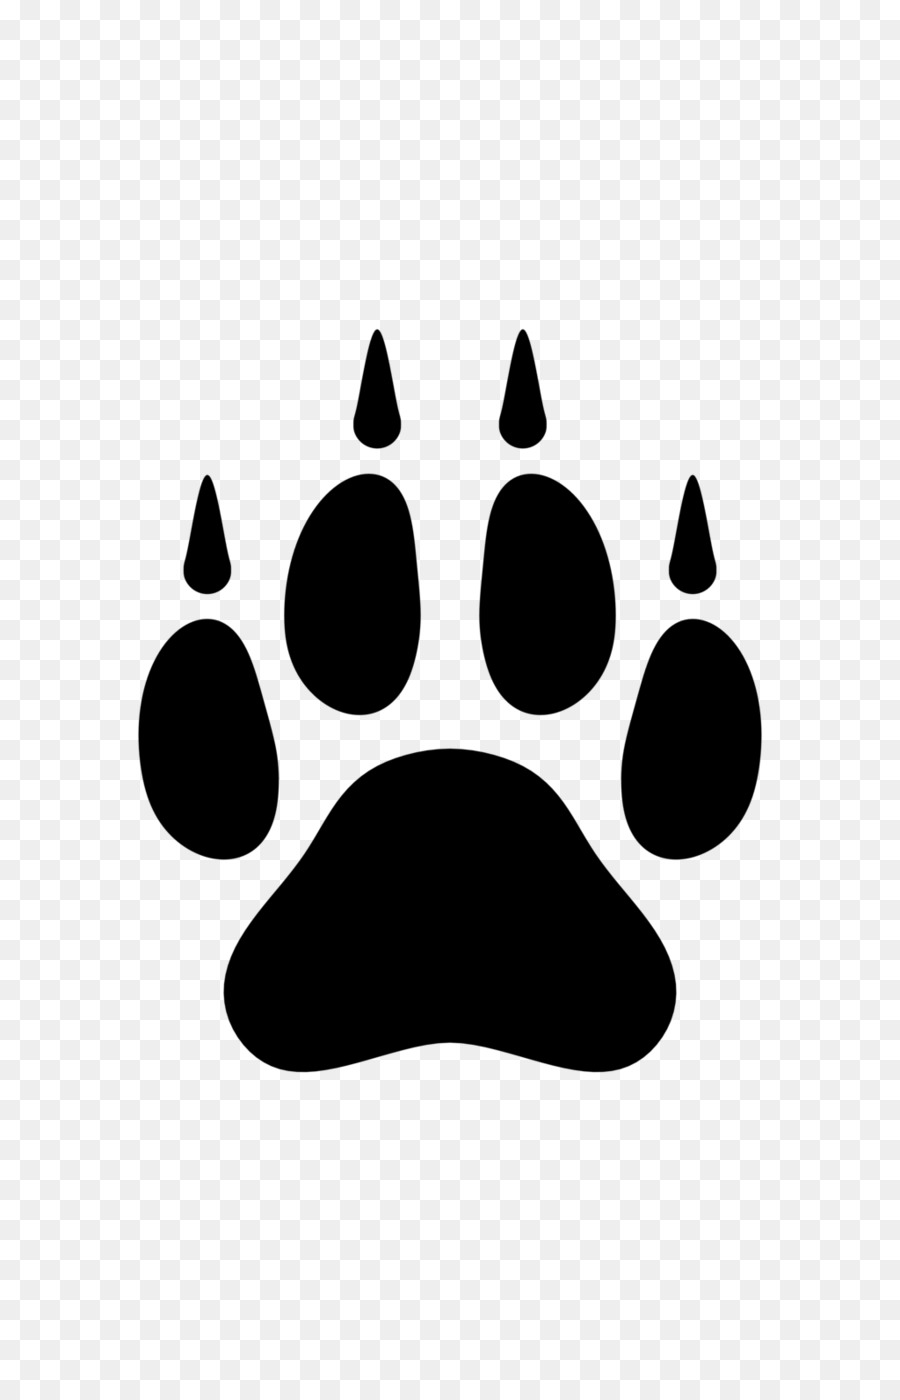 Dog Arctic wolf Paw Clip art Wolf Paw png download